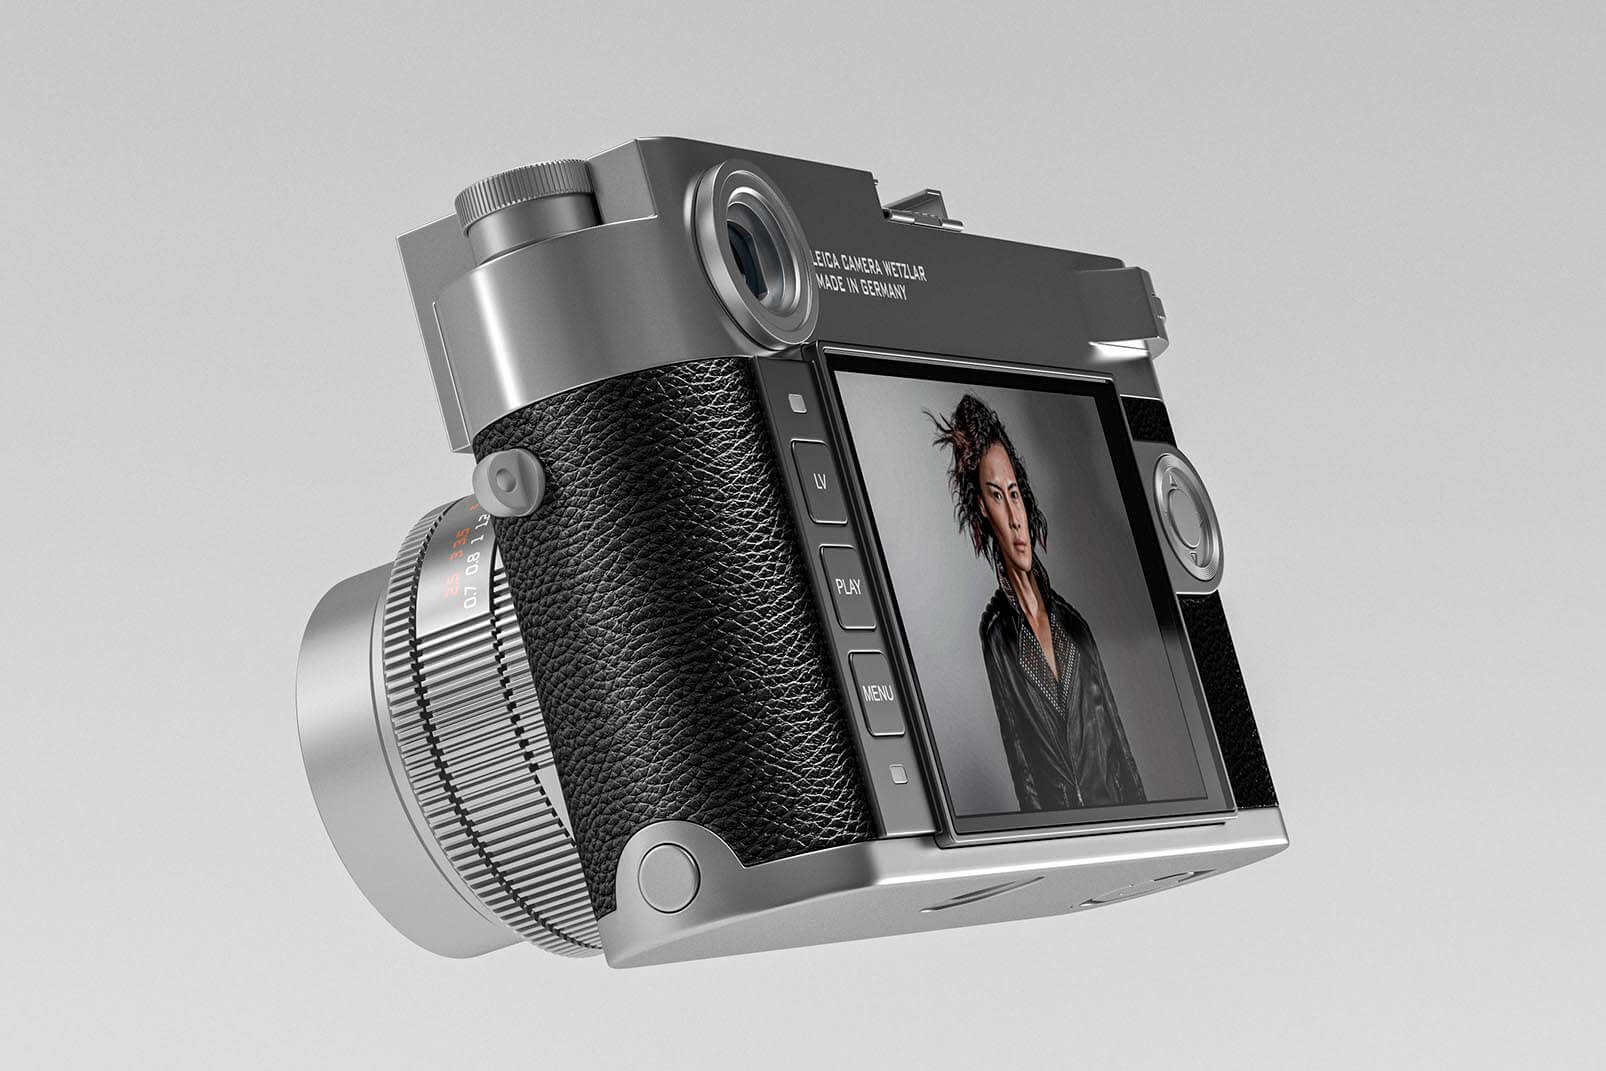 CGI Visualization of Leica M10 Camera CGI by Studio Powers - An independent CGI Studio Based in Singapore Specializing In Product Visualization.